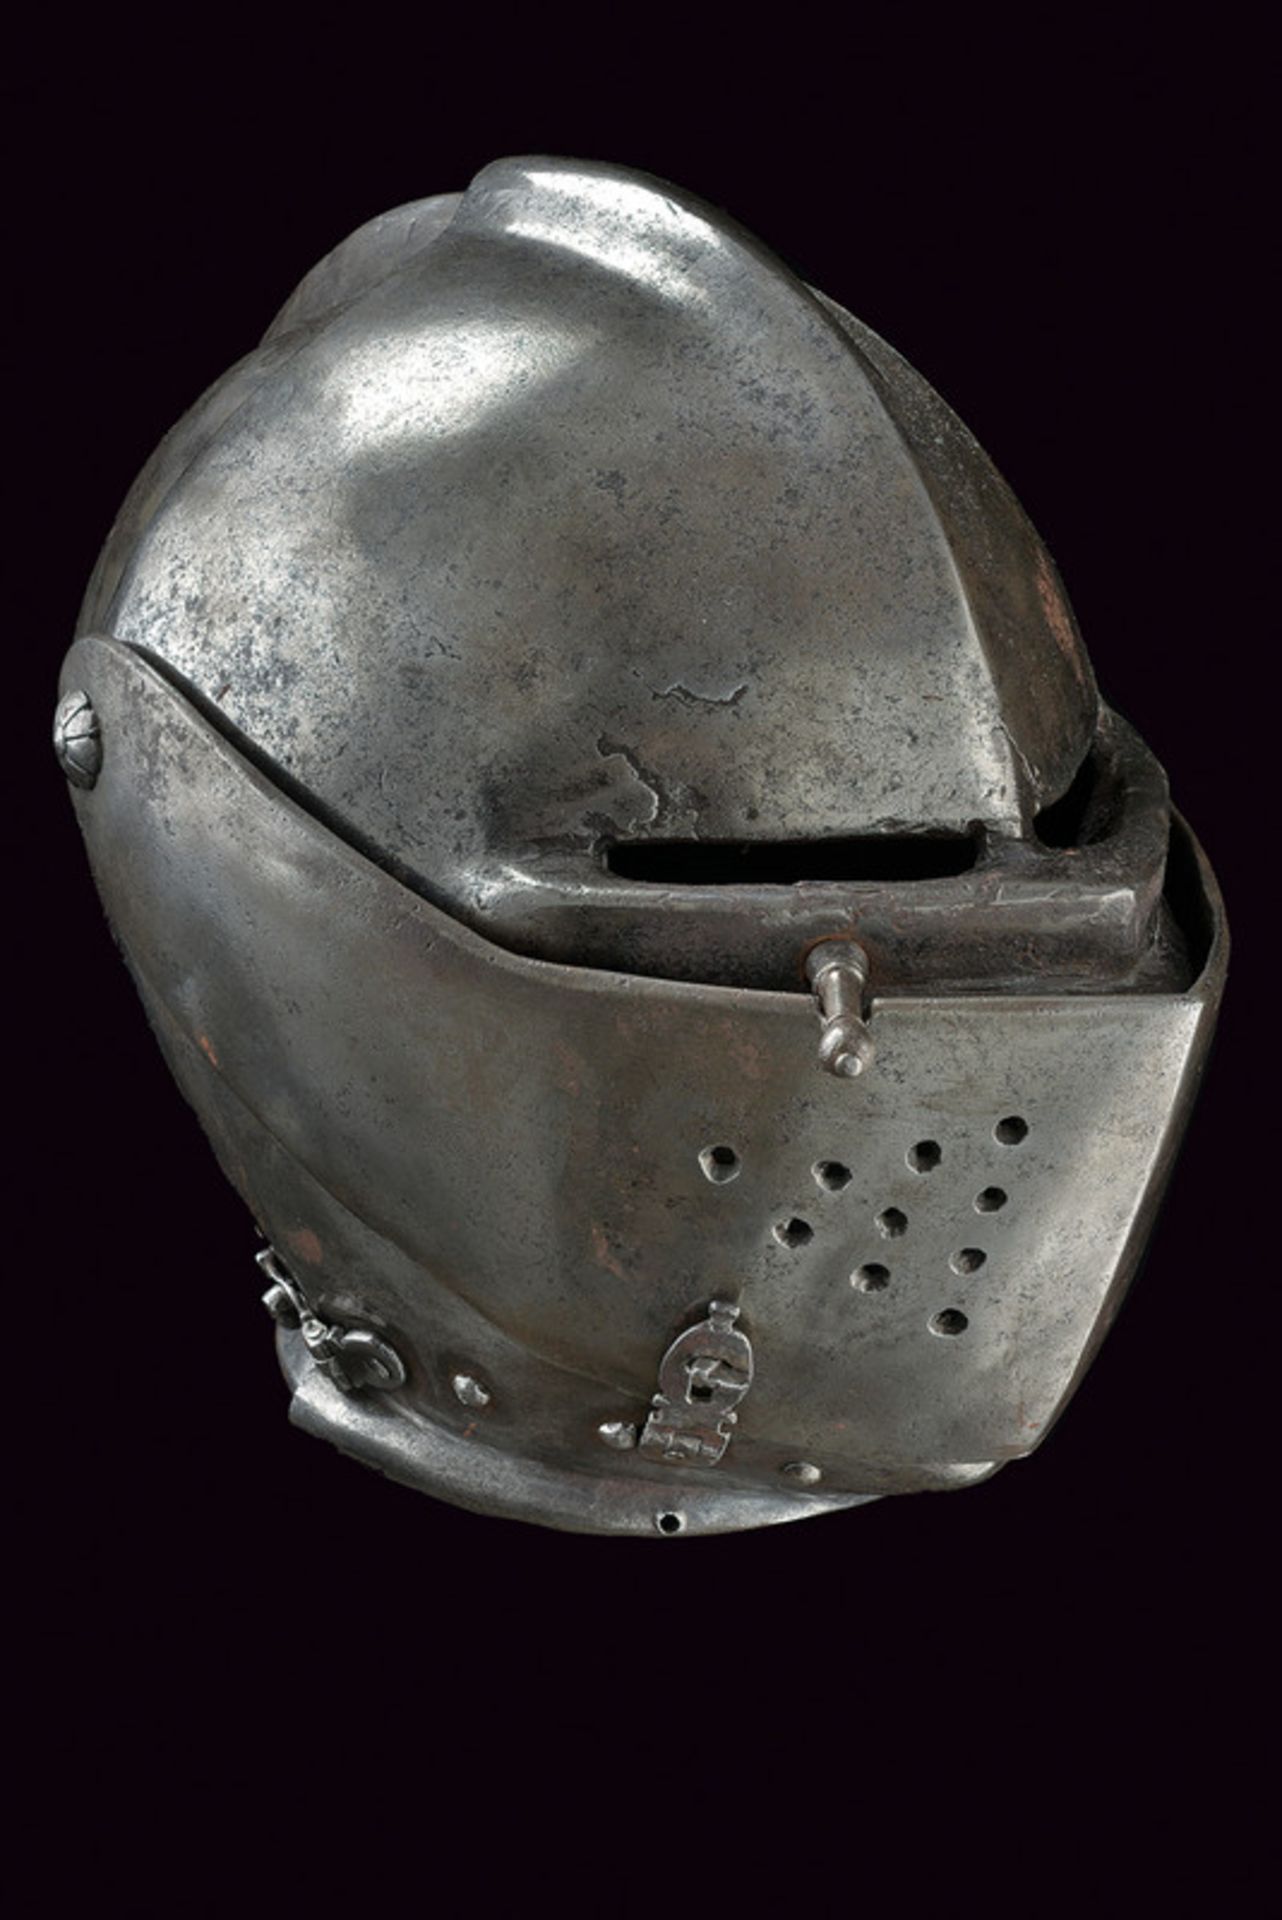 A closed helmet dating: third quarter of the 16th Century provenance: Italy Skull worked in one